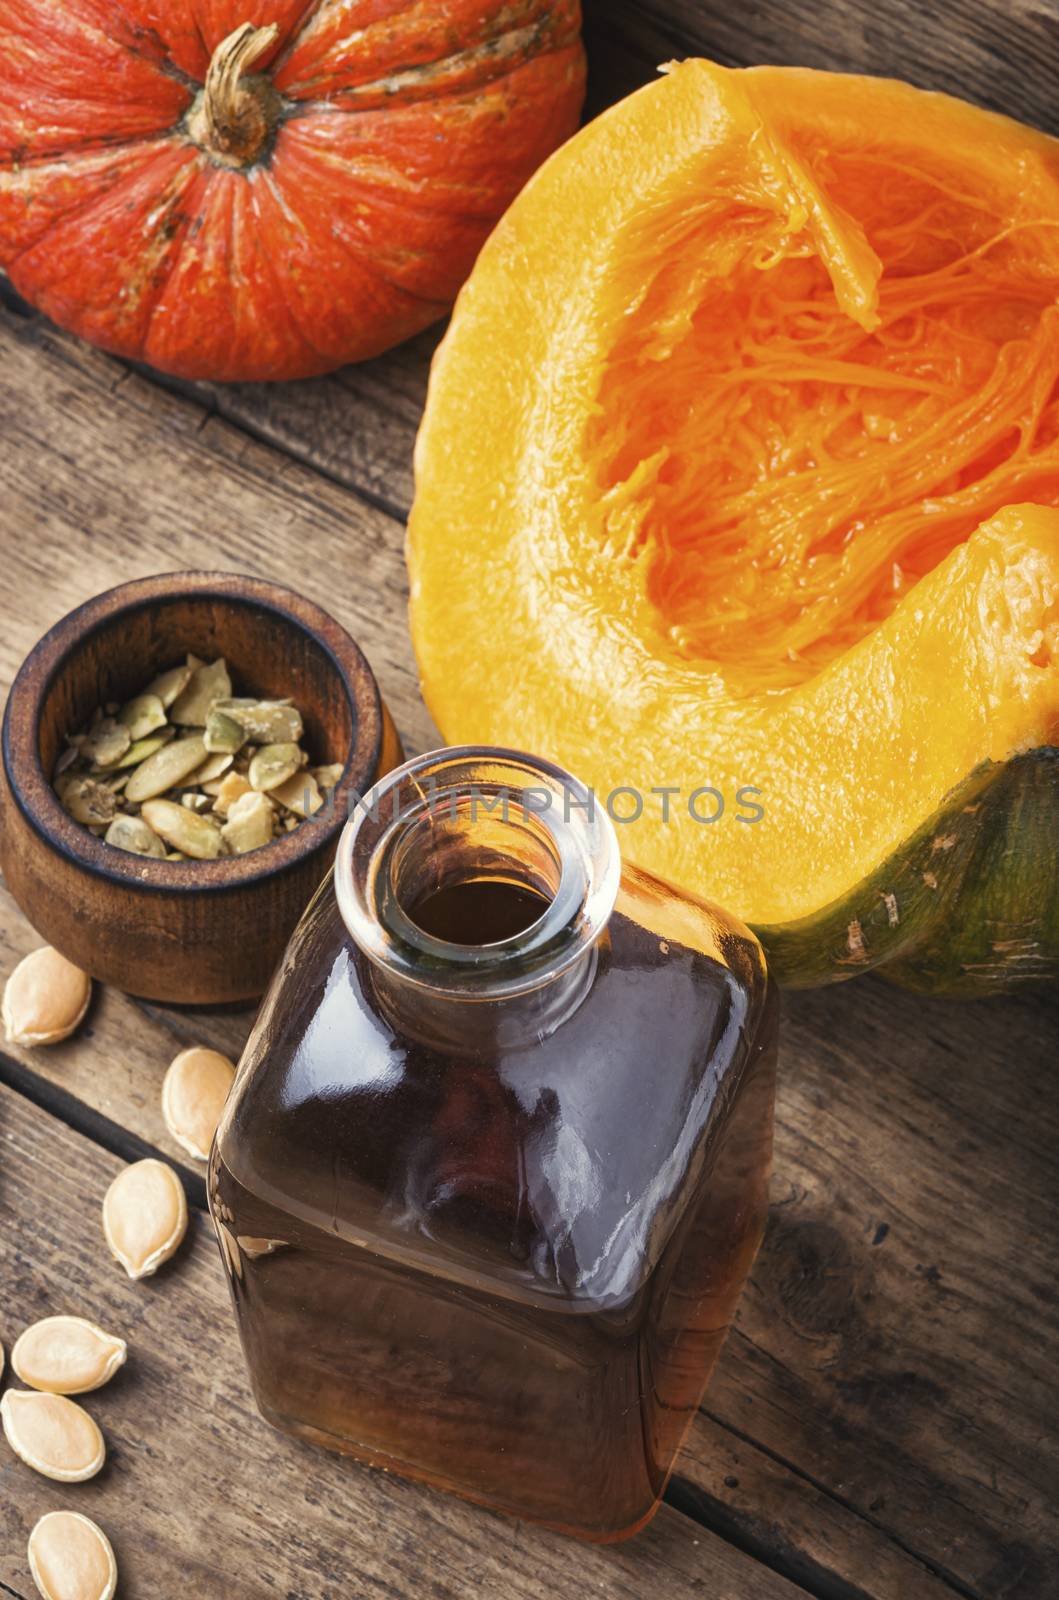 Pumpkin and pumpkin seed oil on wooden table